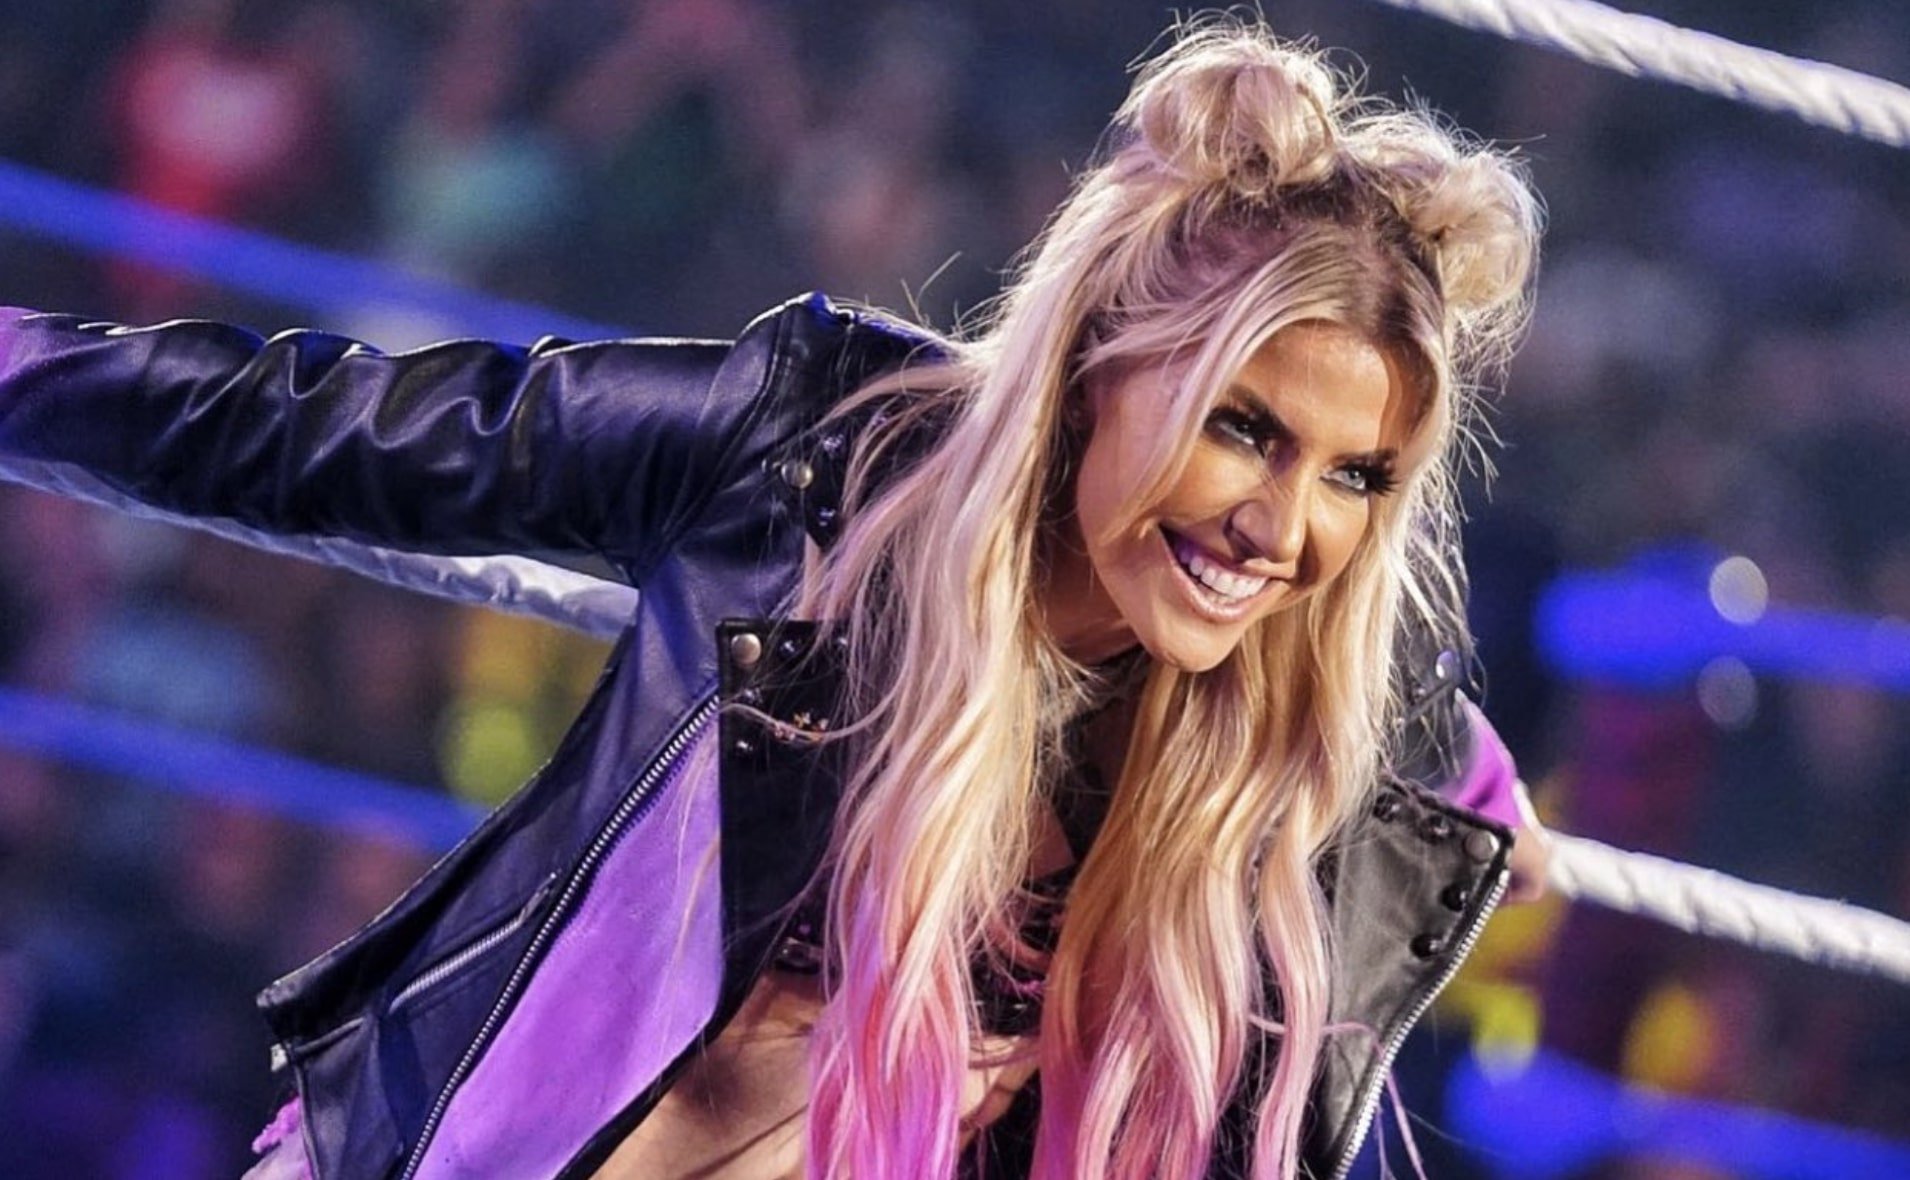 Alexa Bliss Responds After Fan Her To Change Her Song